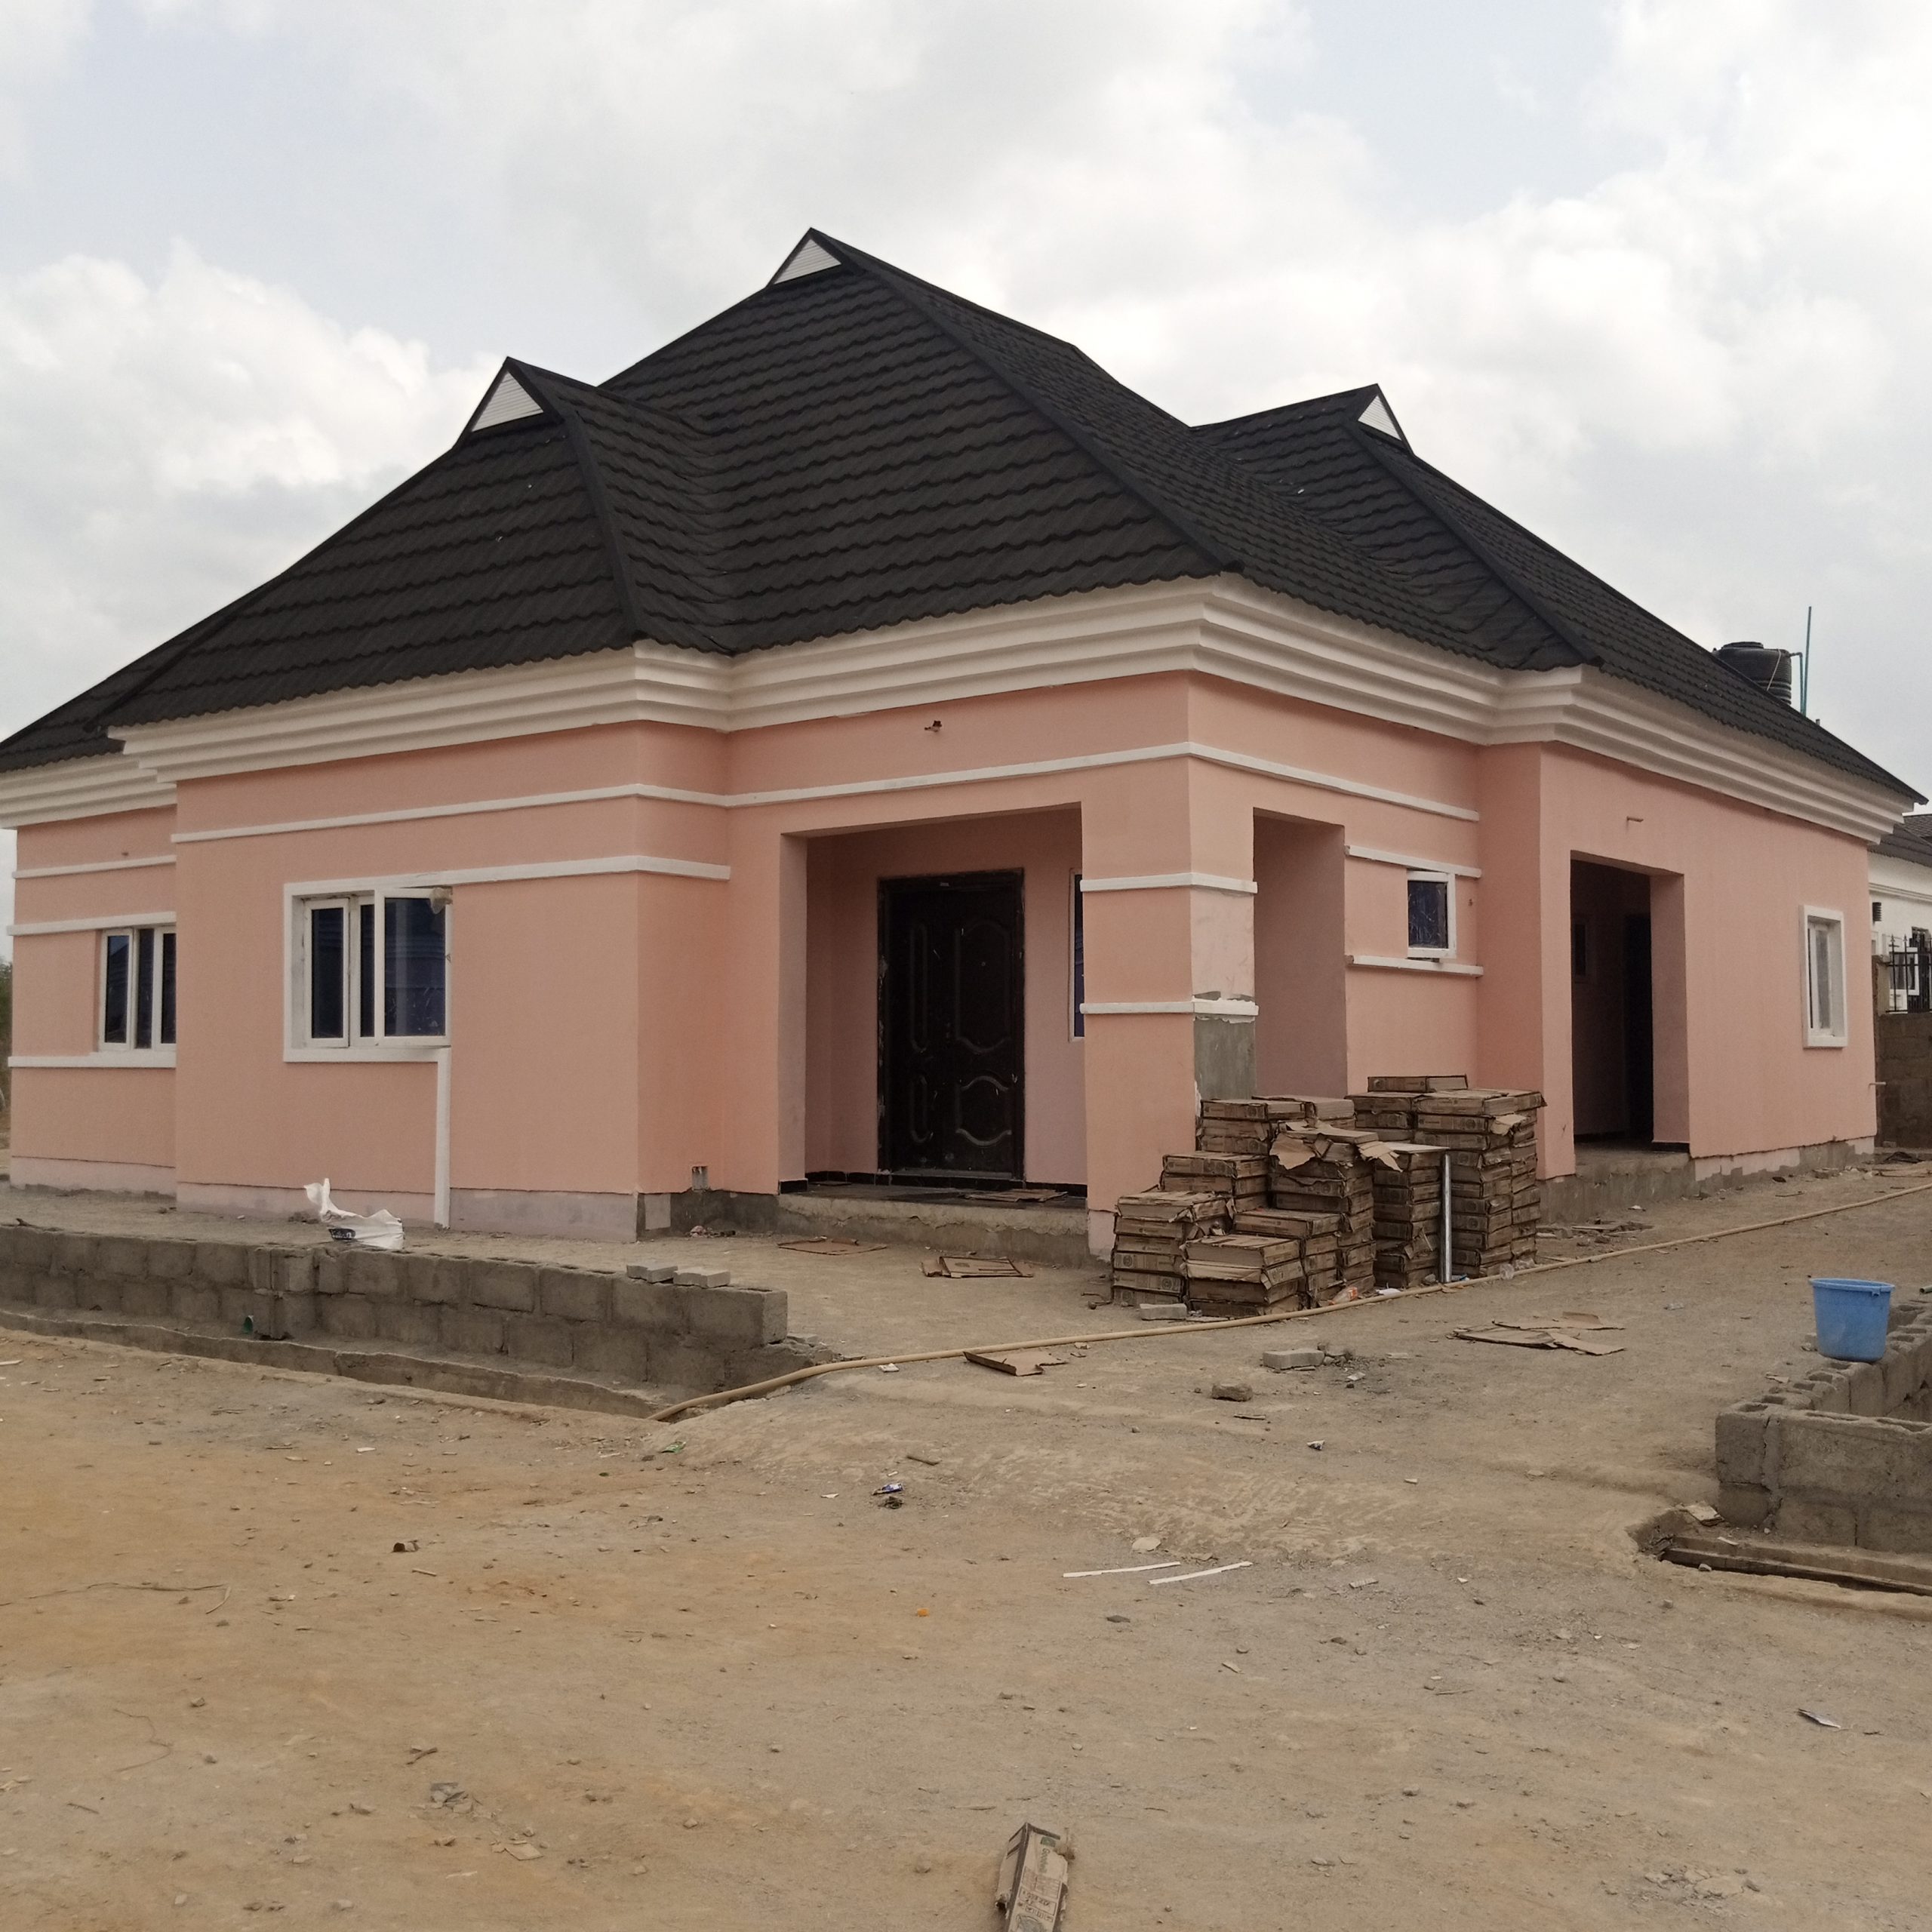 3 Bedroom Standalone Bungalow with Gerald high roofing for sale at Bluestone Estate, Mowe, Lagos Ogun Border Town with 24 months mortgage